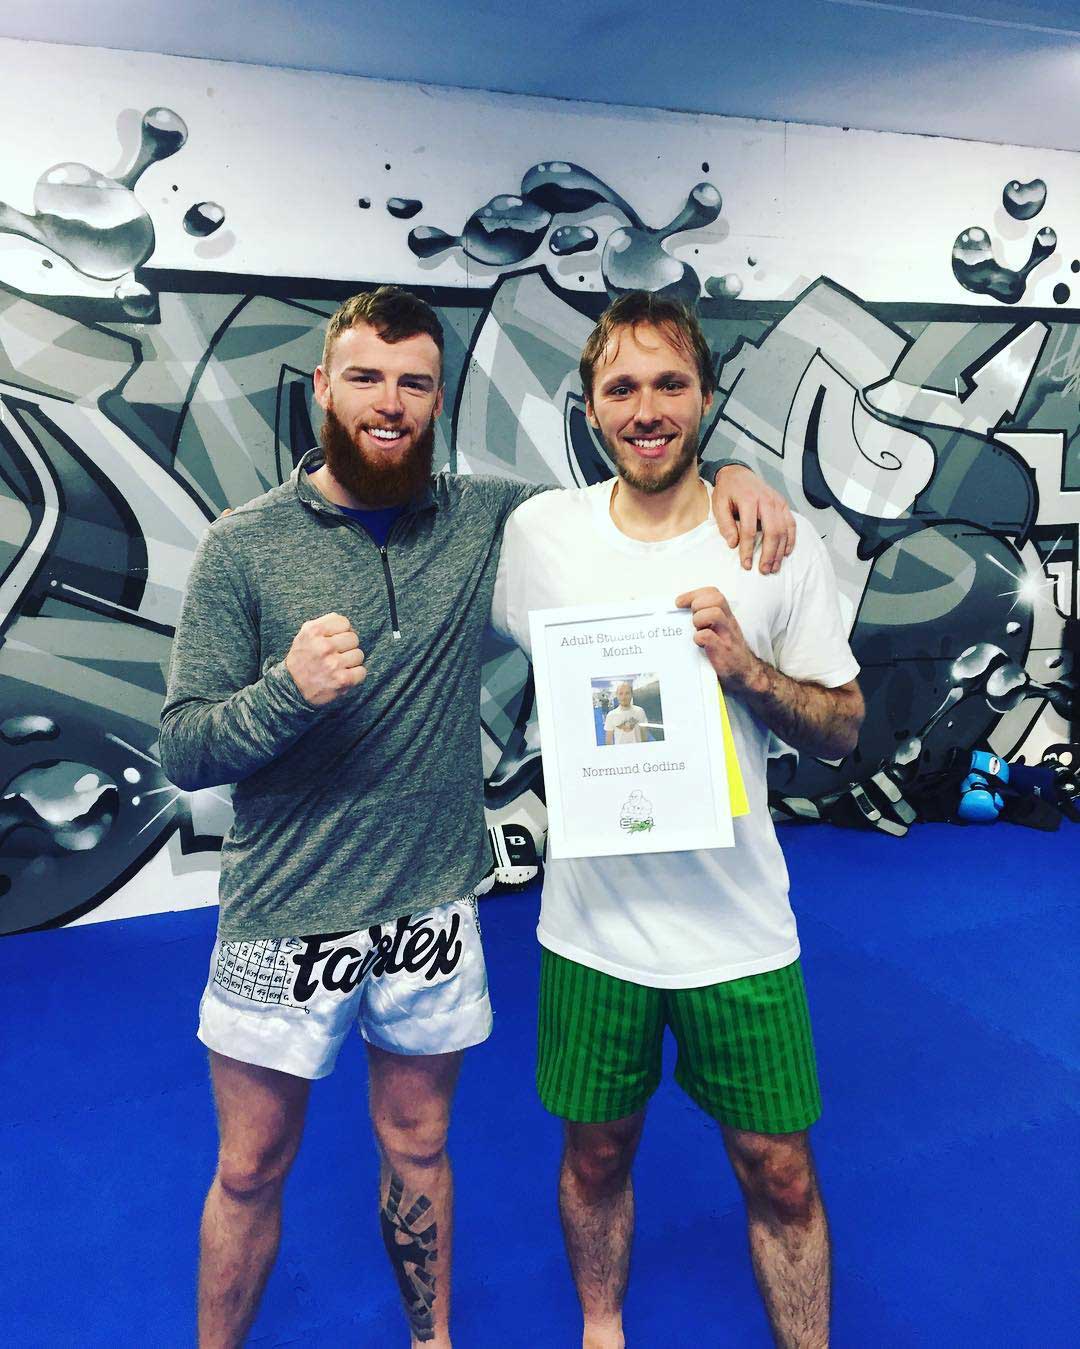 Normund is the sbg dublin24 student of the month